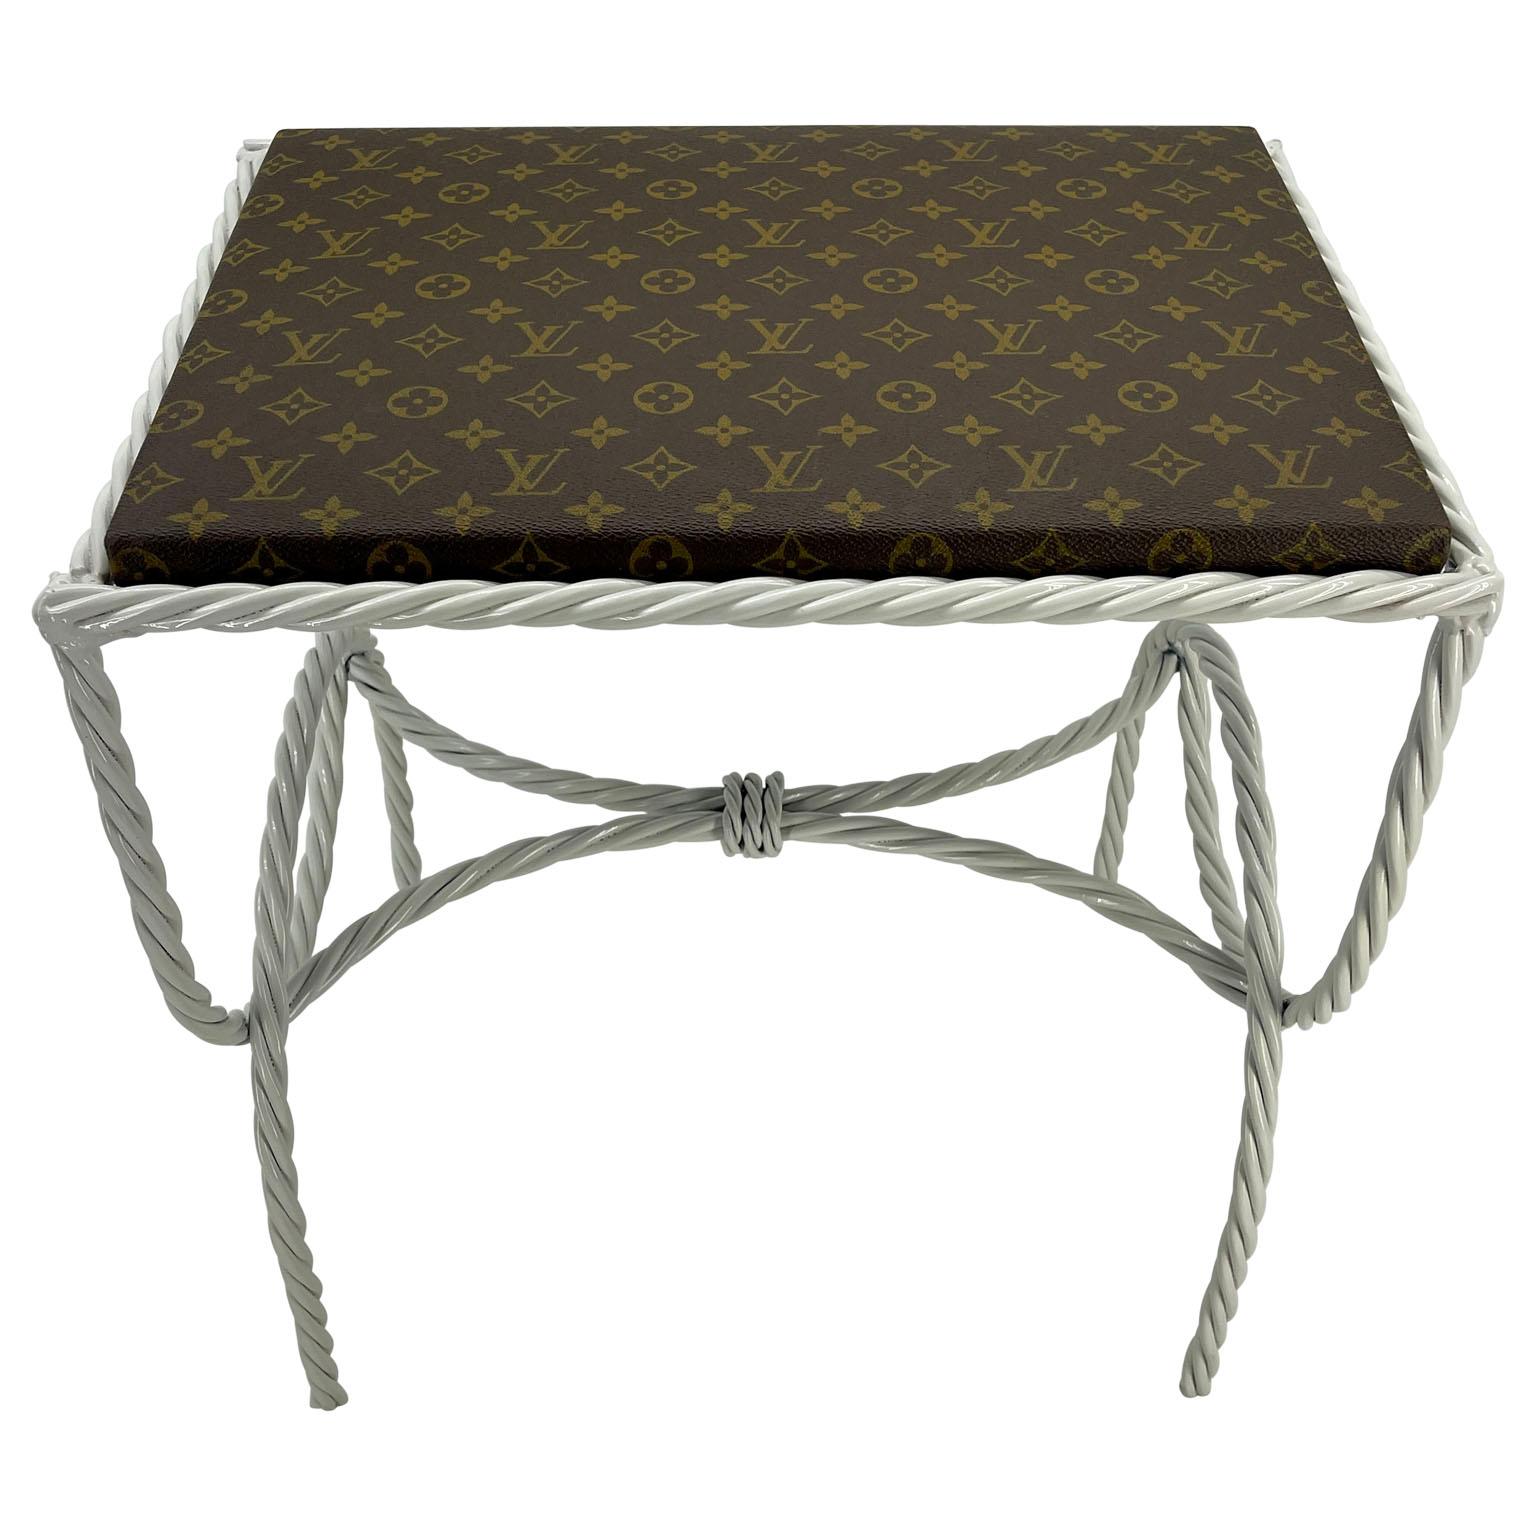 Rope Benches Side Tables Stools with Louis Vuitton Monogram Fabric, A Pair

Design and purpose best describe this one-of-a-kind custom set. This pair features authentic classic Monogram Louis Vuitton fabric seats atop very sturdy freshly